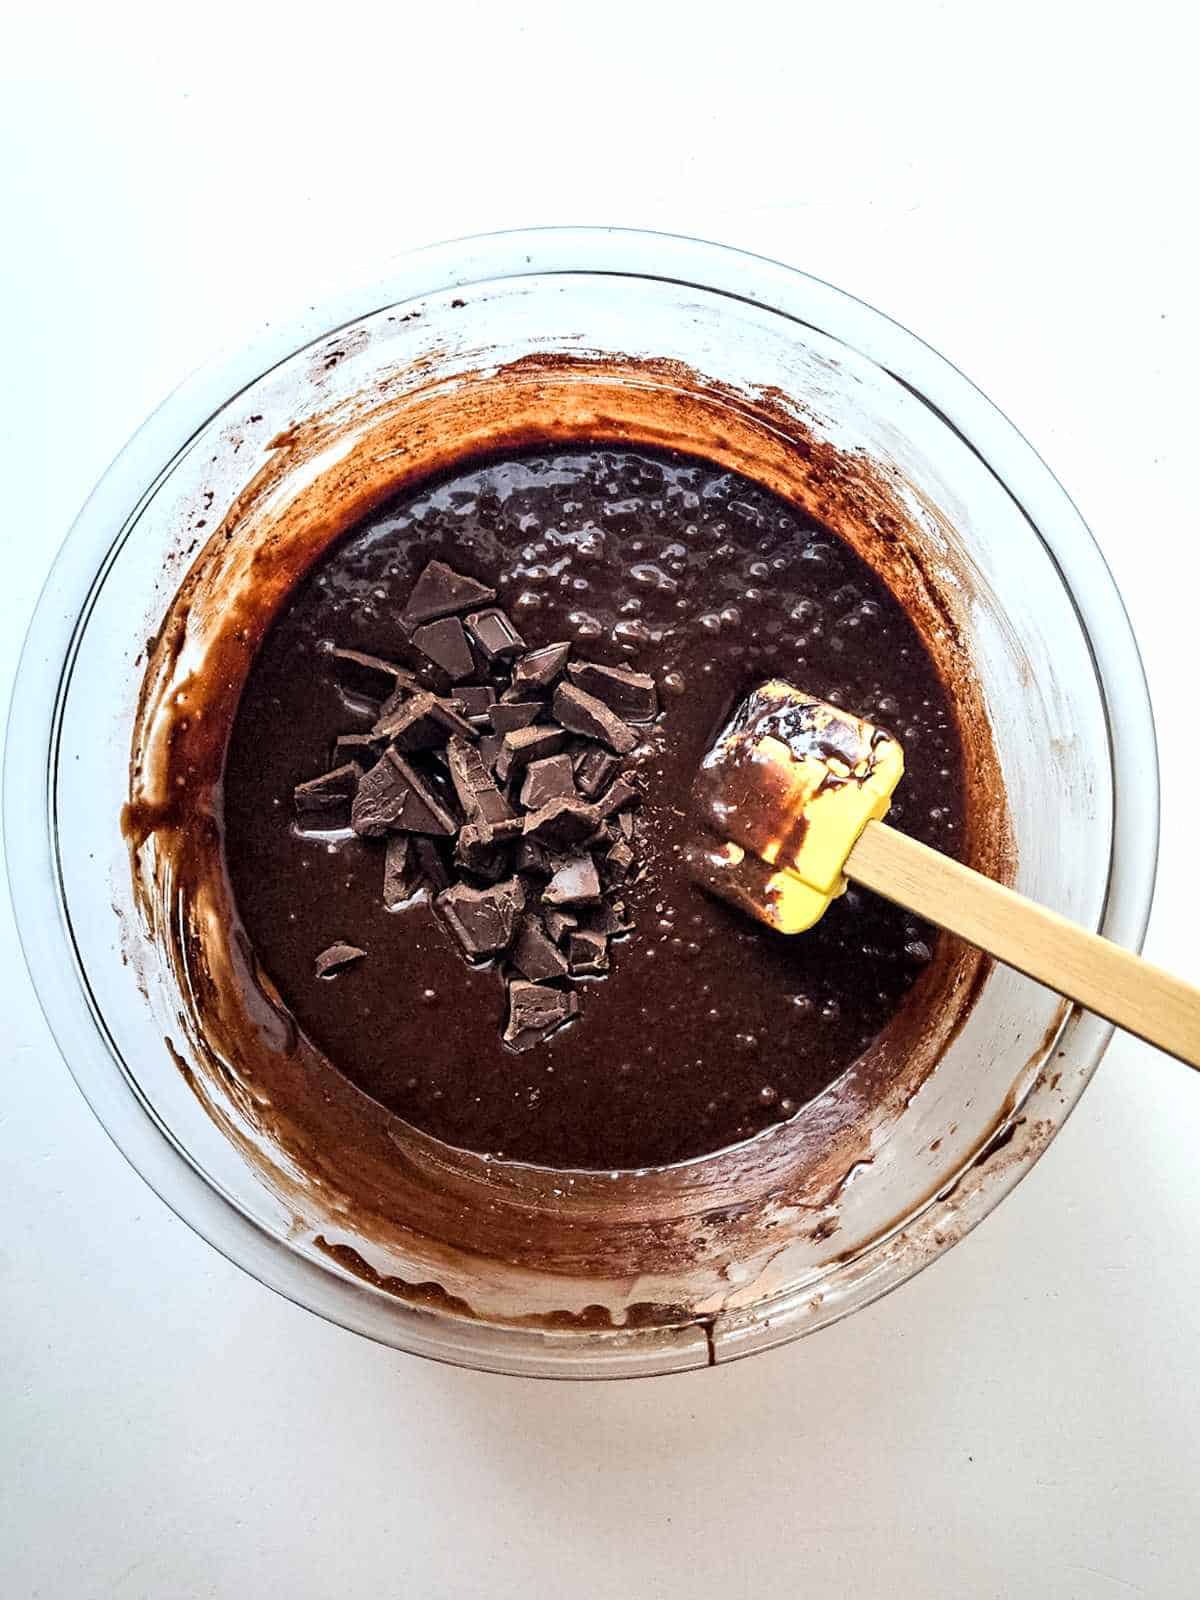 brownie batter mixed with chopped chocolate pieces.